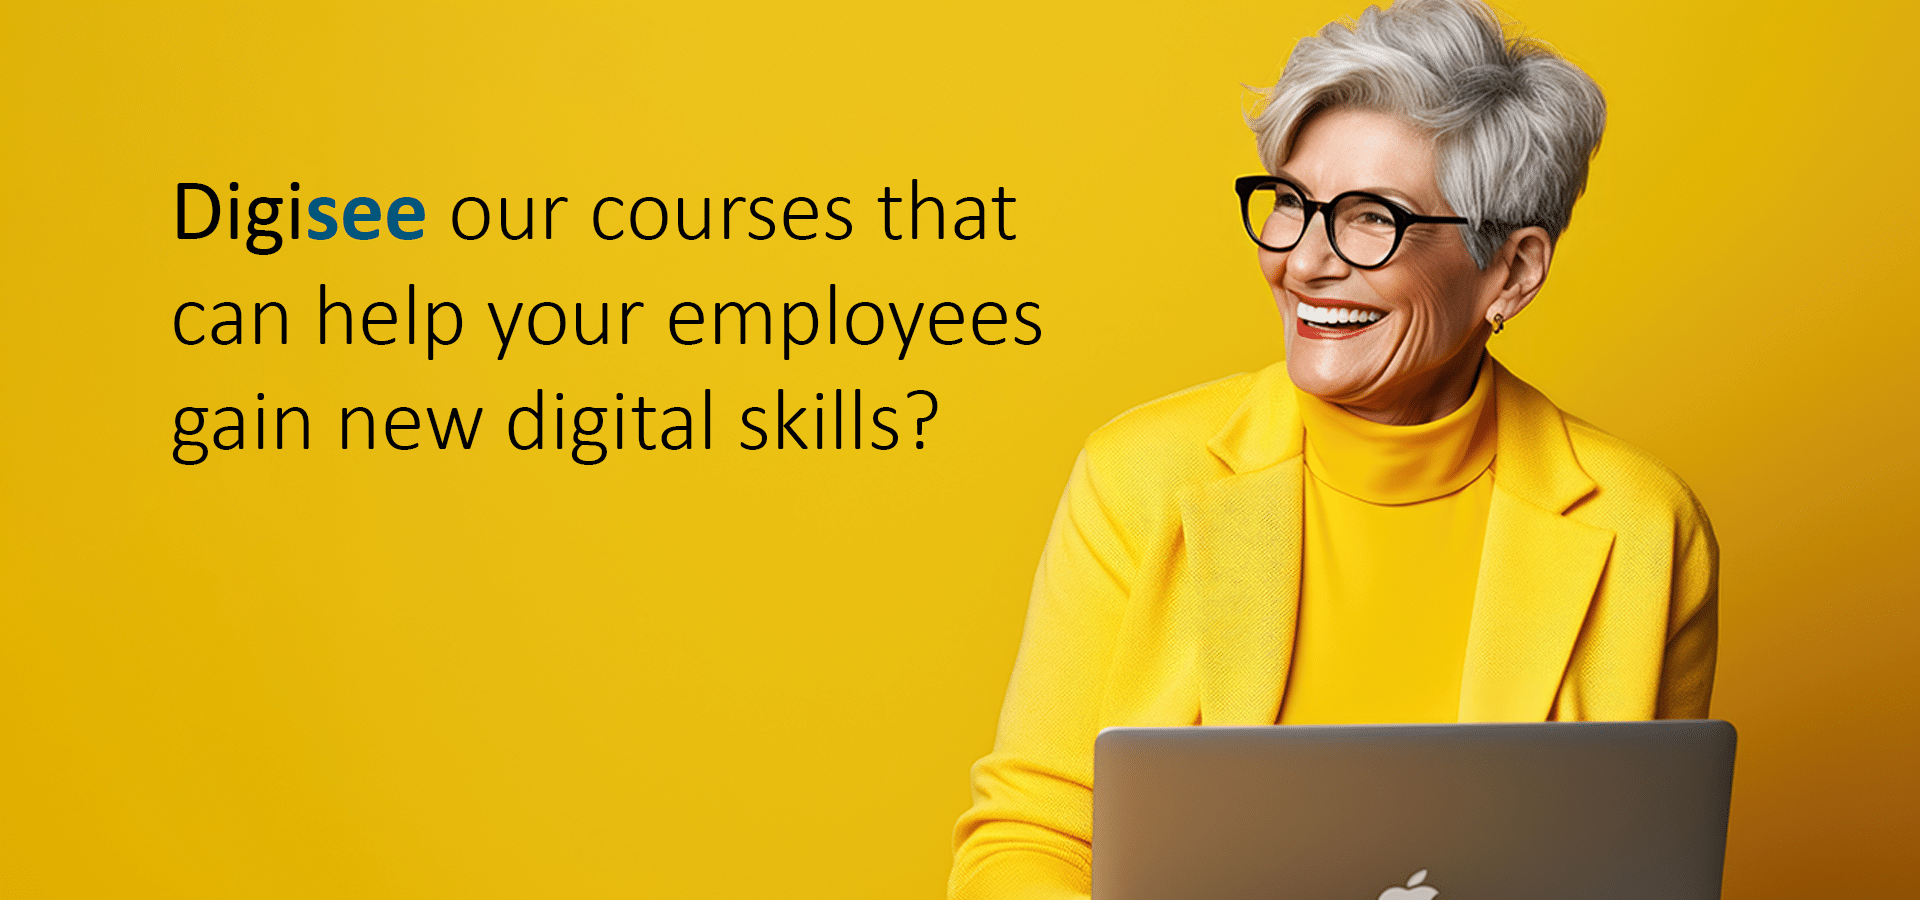 Digitay Graphic - Digisee our courses that can help your employees gain new digital skills?